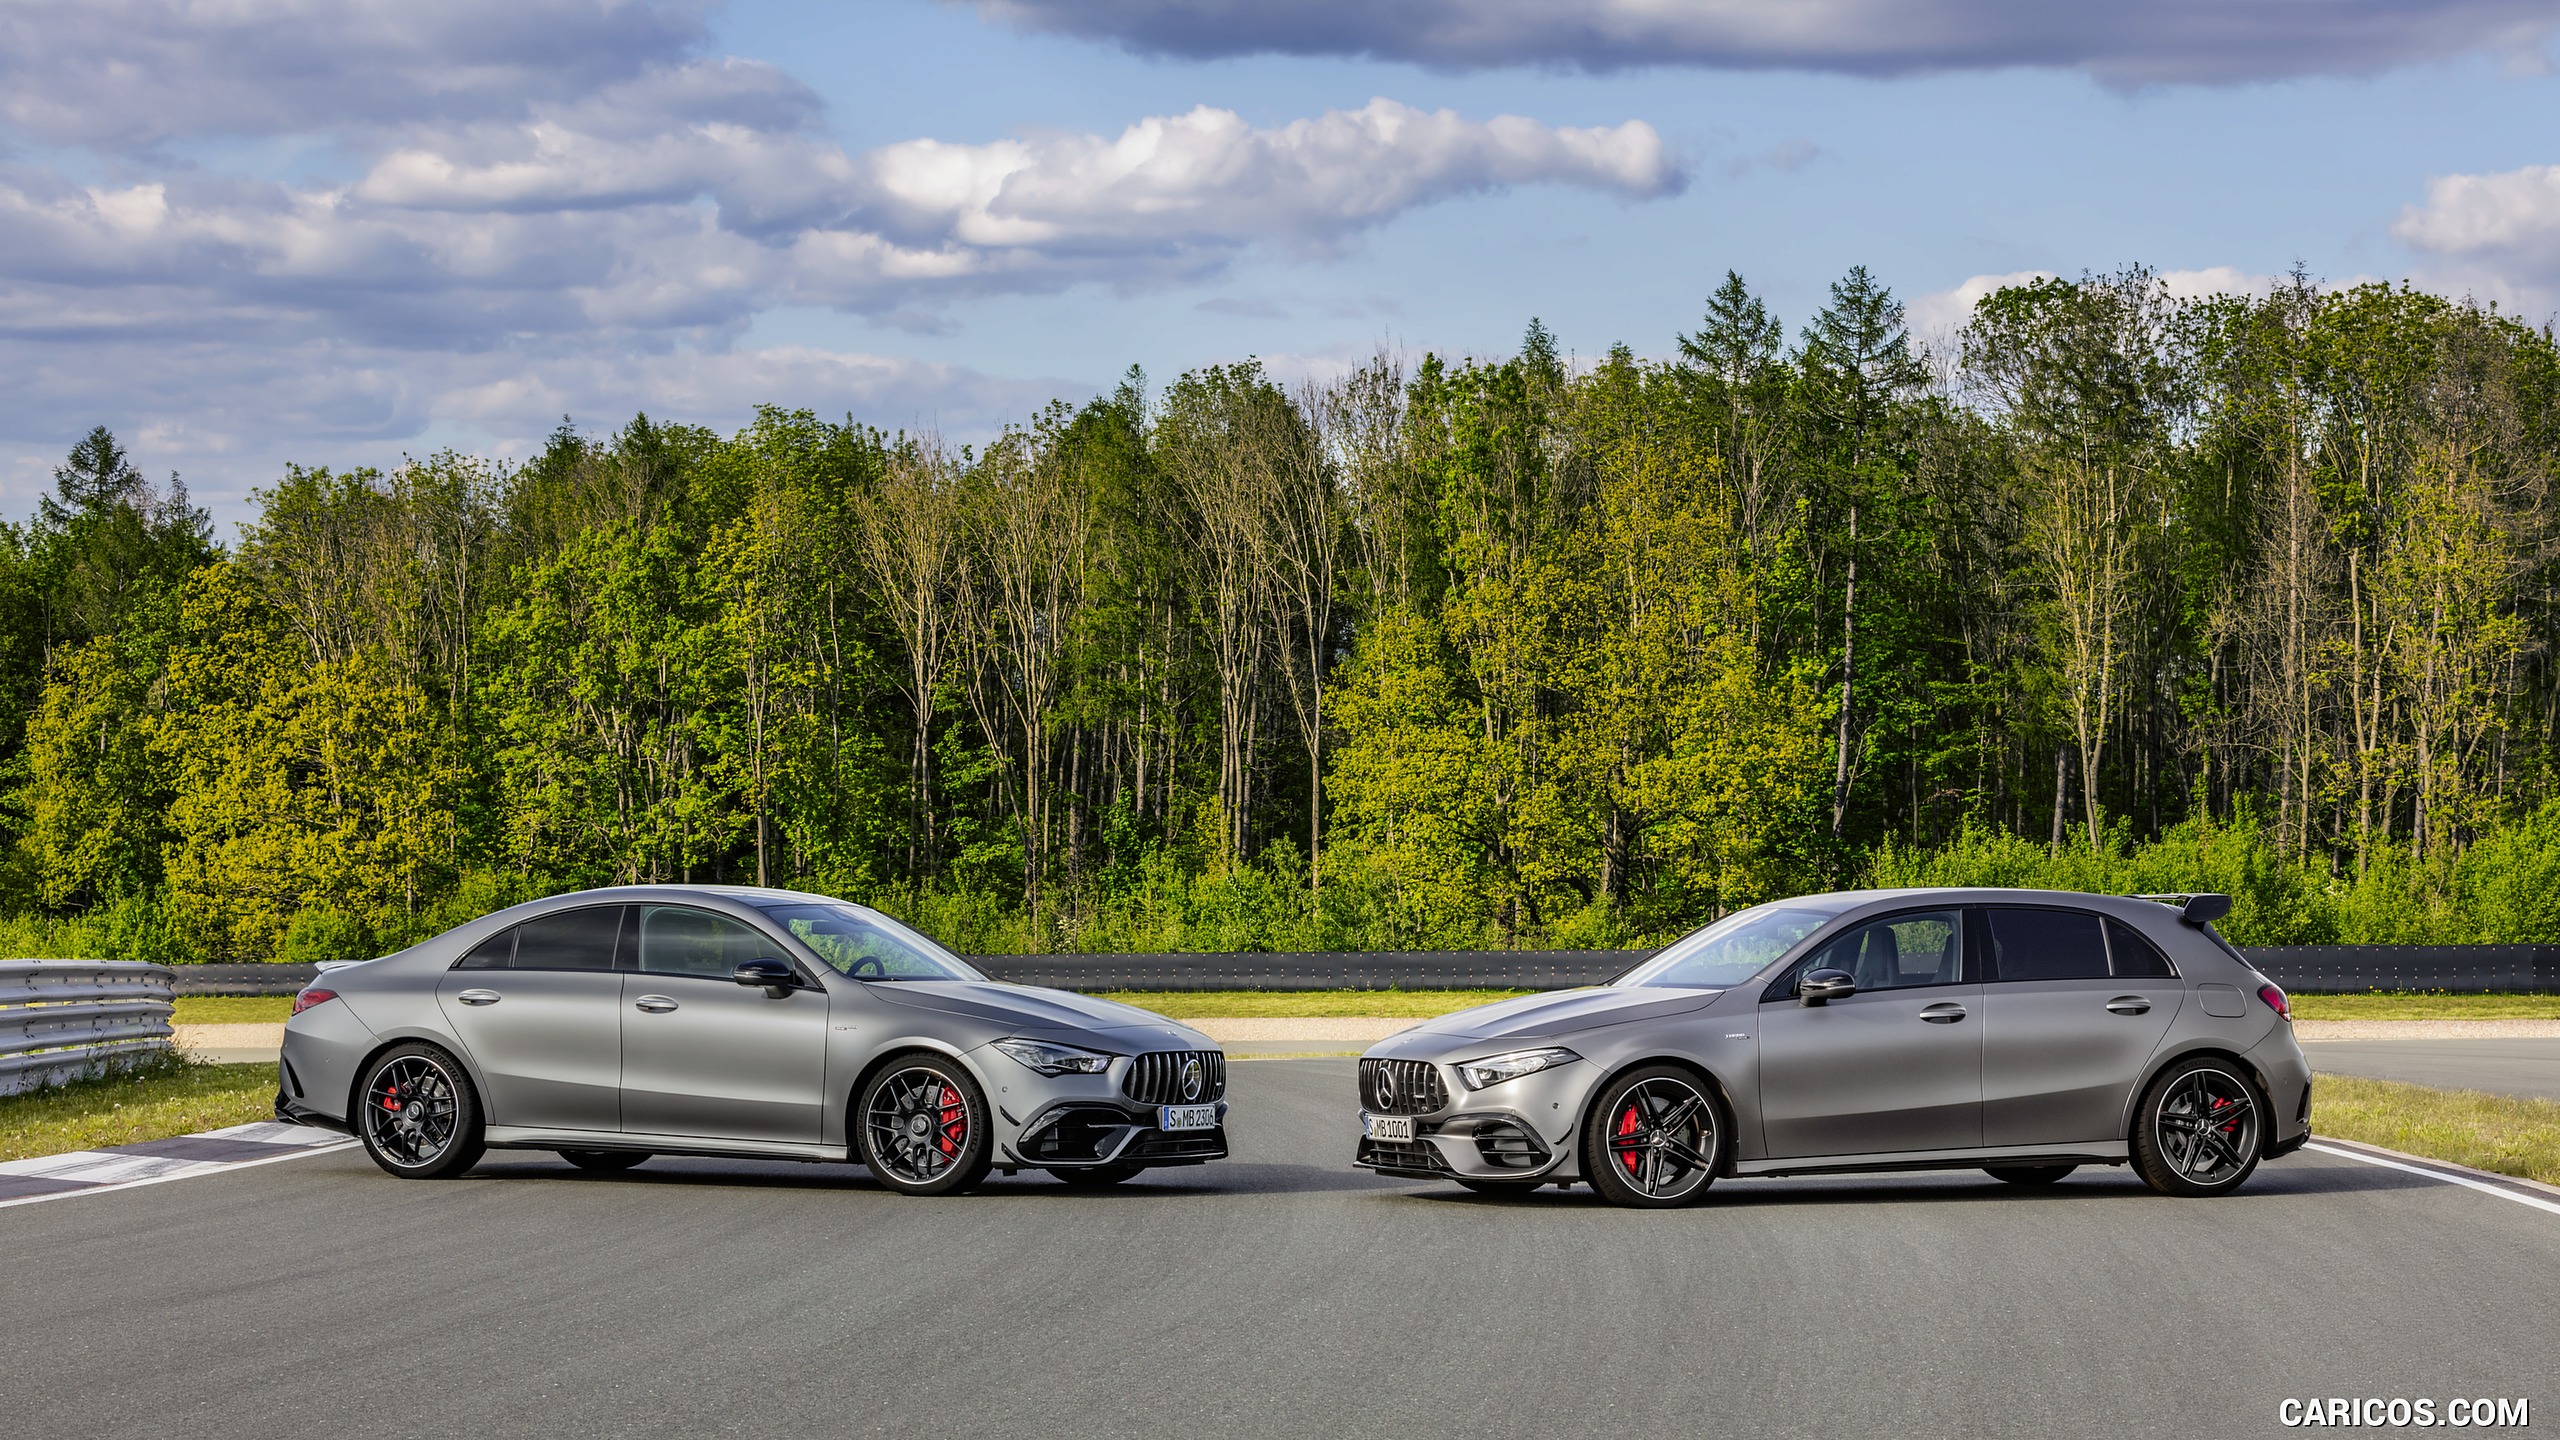 2020 Mercedes-AMG A 45 S 4MATIC+ and CLA 45 AMG, #43 of 188